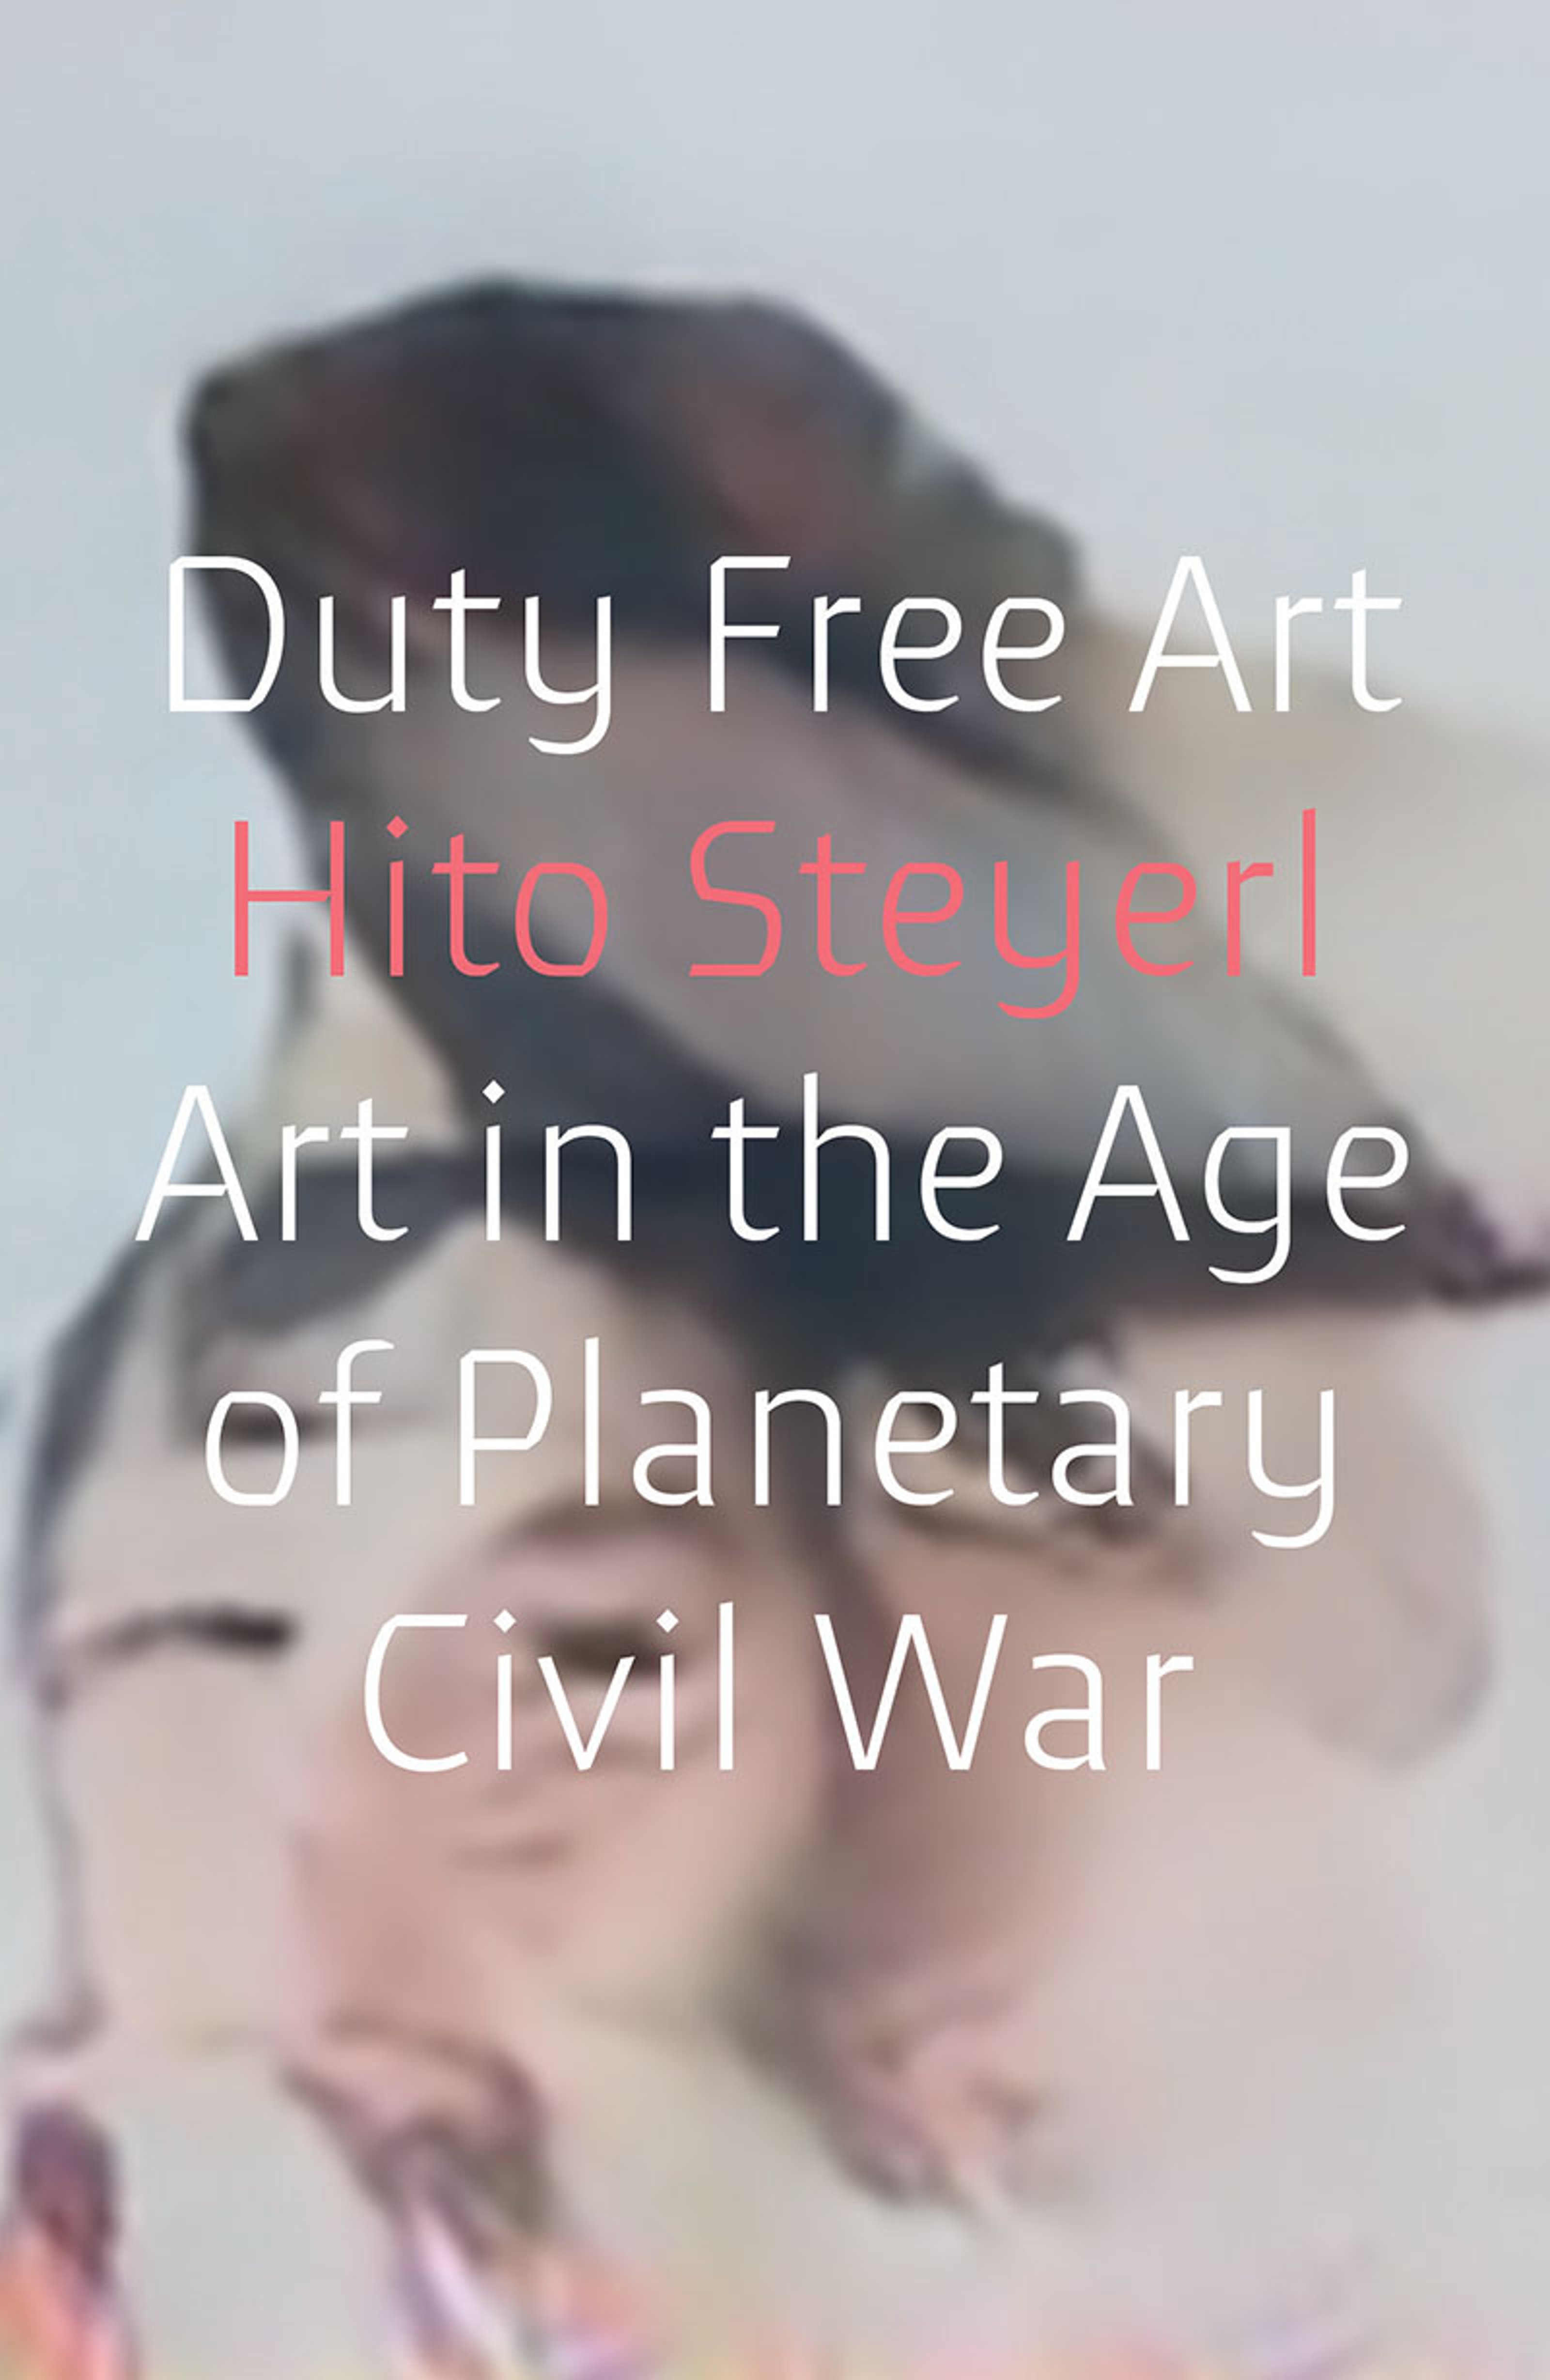 Hito Steyerl book cover for Duty Free Art - Art in the age of Planetary Civil War